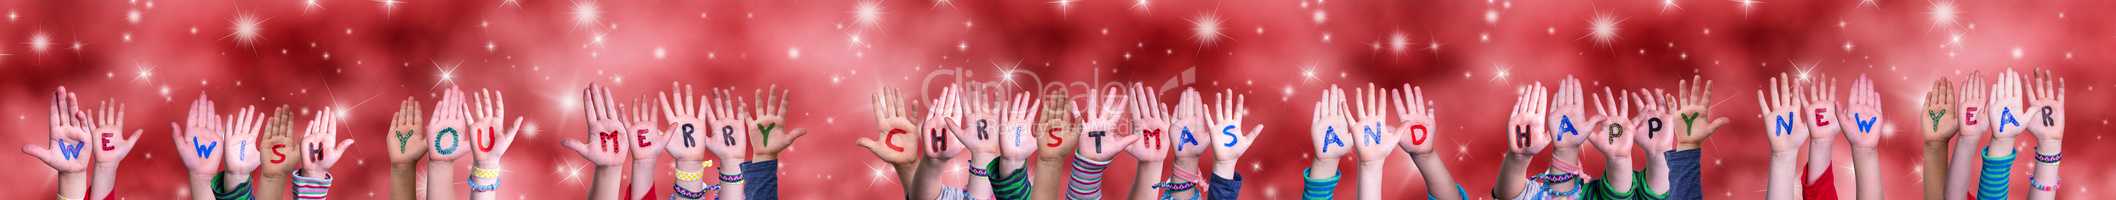 Children Hands, Wish You A Merry Christmas, Happy New Year, Red Background